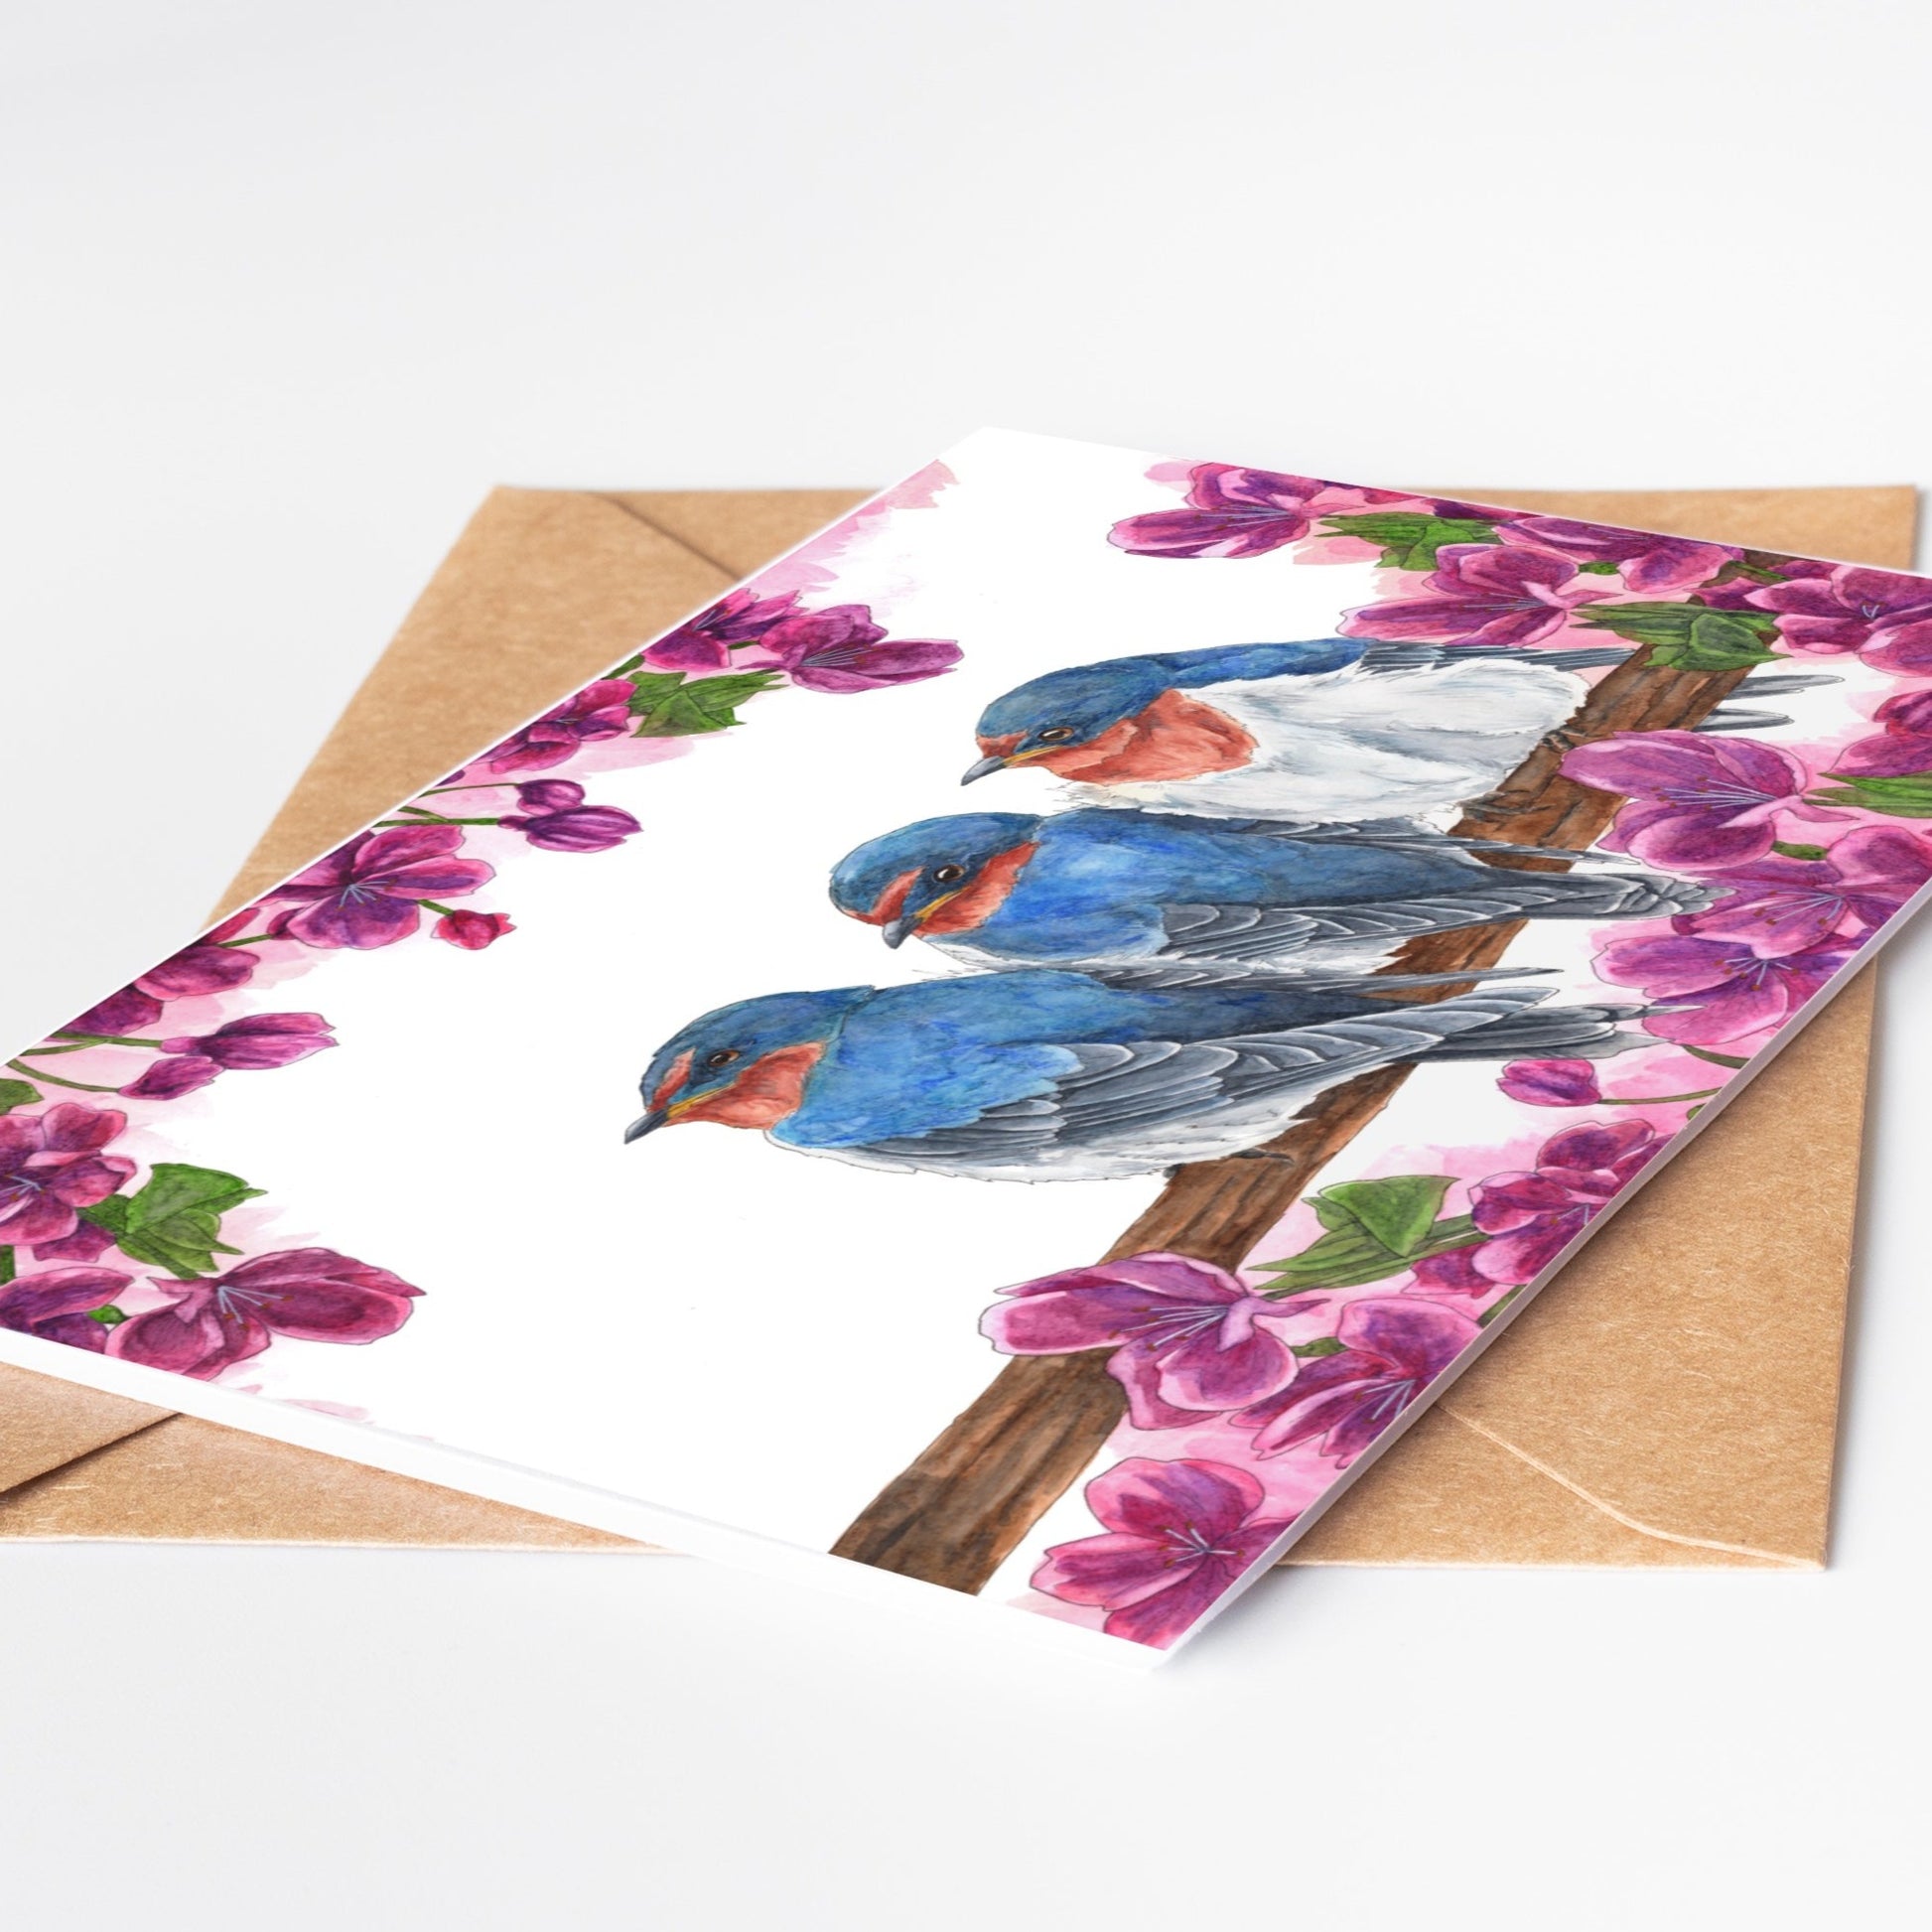 Greeting card by artist Leah Ingram featuring 3 Swallows on a branch surrounded by purple flowers.